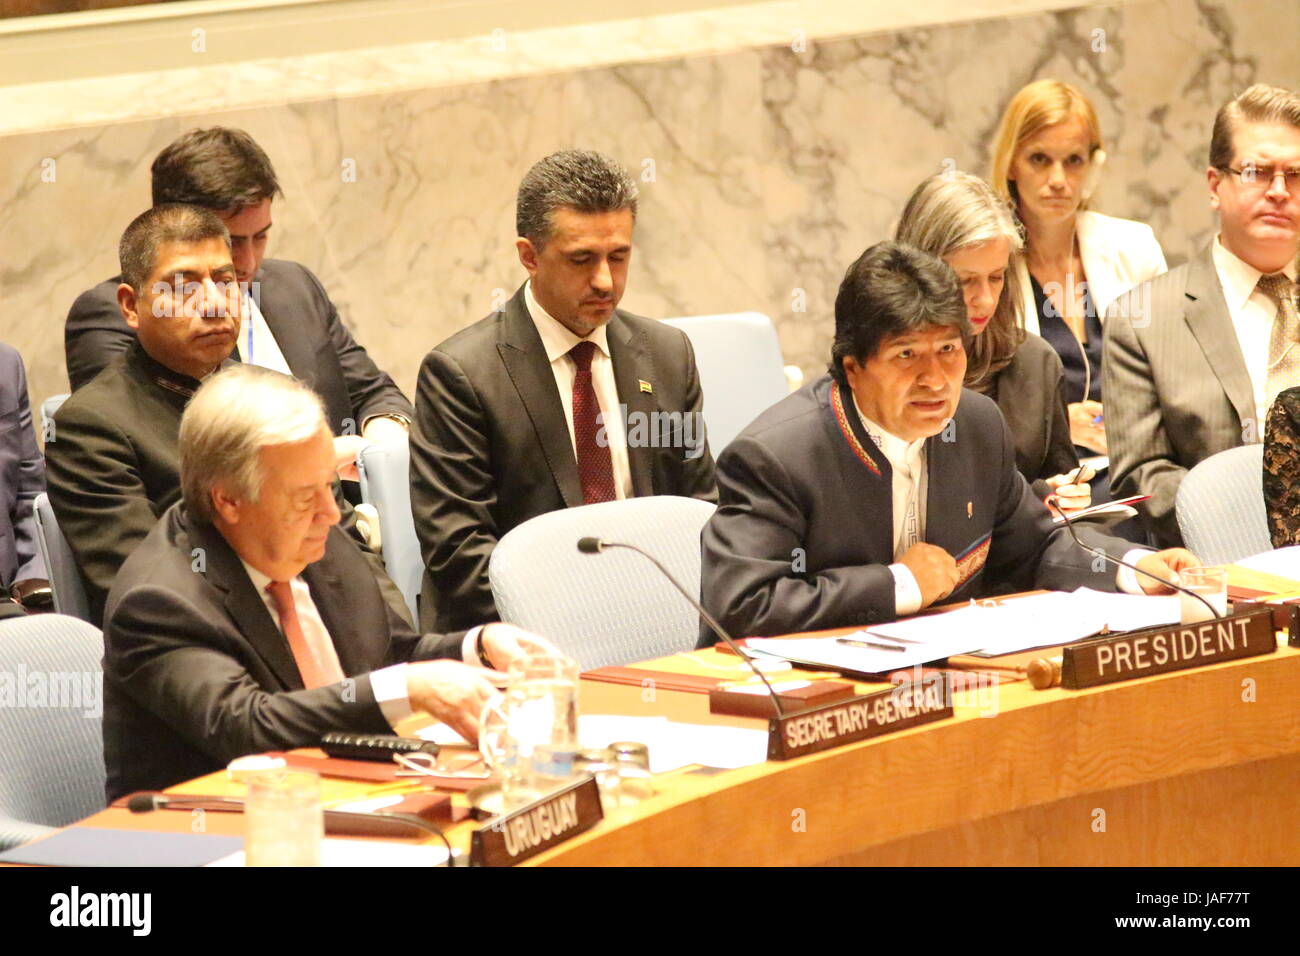 UN, New York, USA. 6th June, 2017. At UN in NY, Bolivia's President Evo Morales Ayma addresses UN Security Council debate on “Preventive diplomacy and transboundary waters,” with UN Secreary General Antonio Guterres Credit: Matthew Russell Lee/Alamy Live News Stock Photo